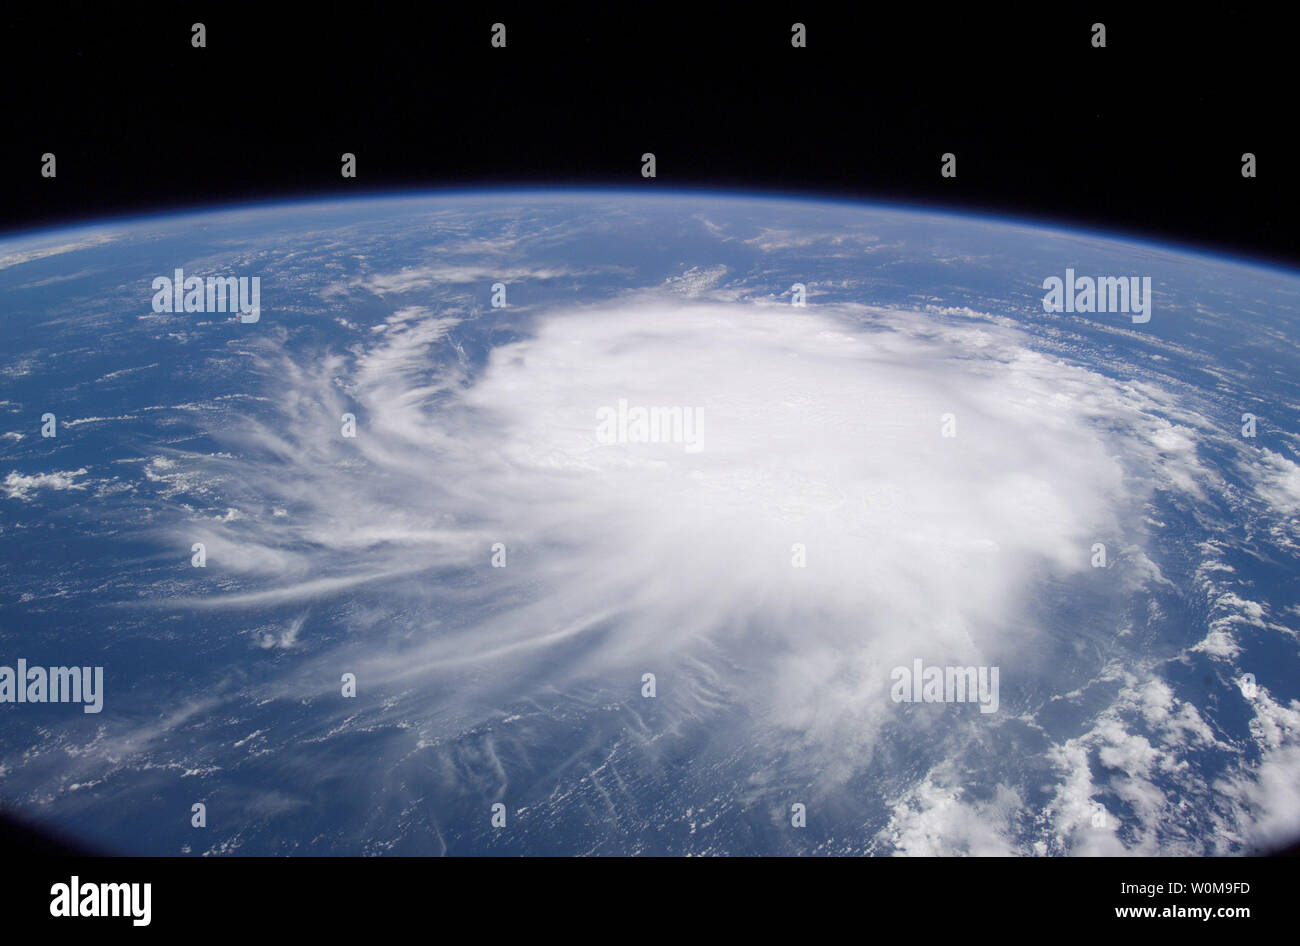 Tropical Storm Chris was located to the east of Puerto Rico and the Leeward Islands at 9:29 a.m. (CDT), August 2, 2006, when one of the members of the Expedition 13 crew onboard the International Space Station recorded this still image. (UPI Photo/NASA) Stock Photo